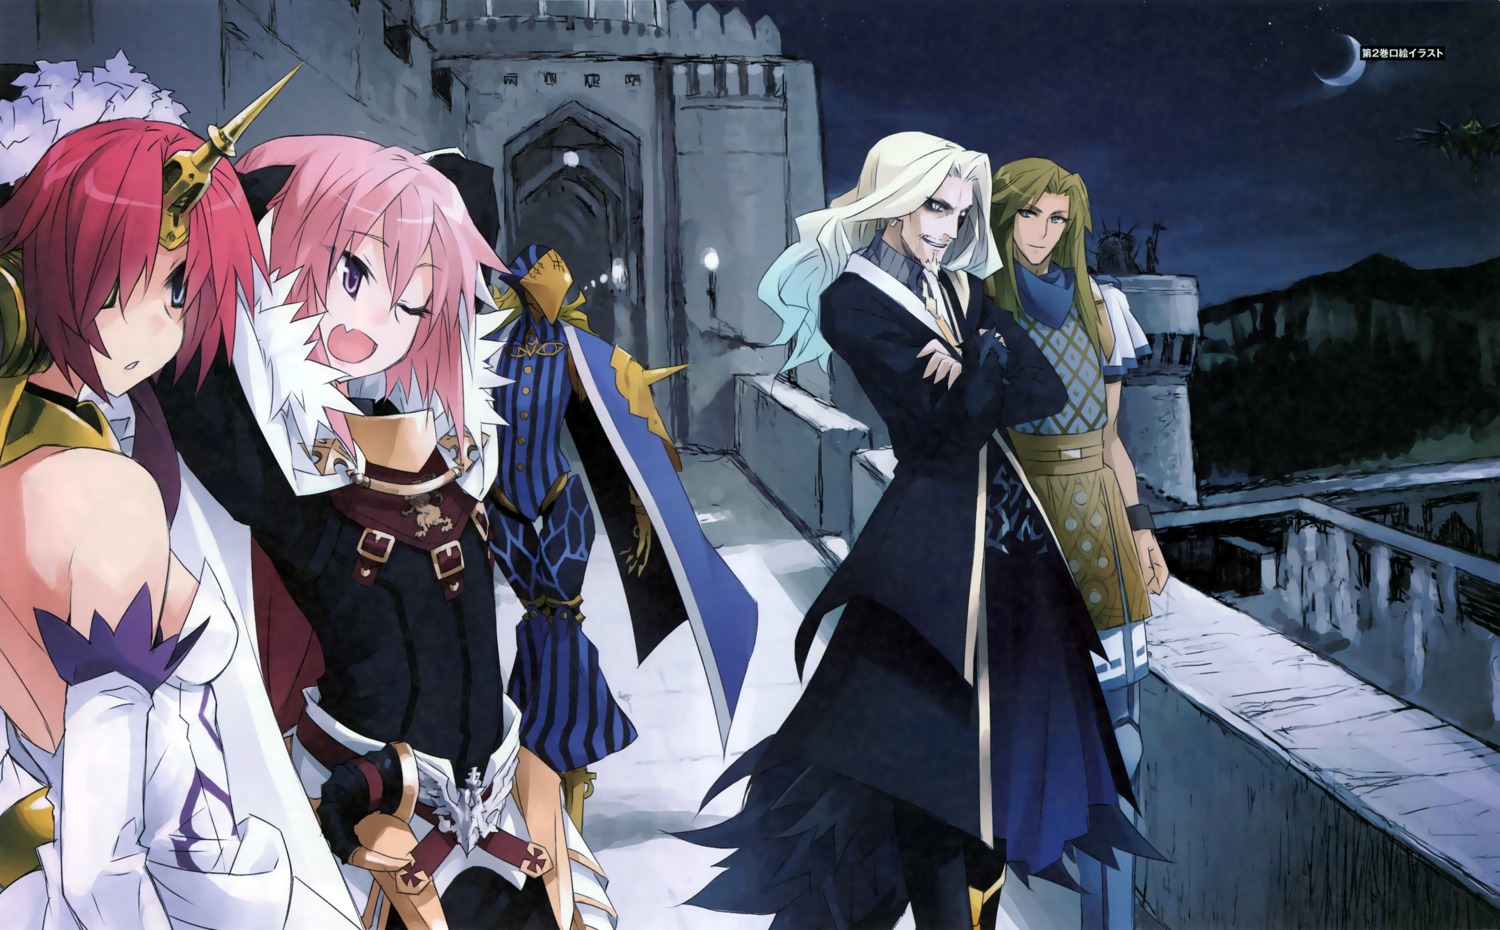 archer_of_black_(fate/apocrypha) armor astolfo_(fate) caster_of_black_(fate/apocrypha) dress fate/apocrypha fate/stay_night frankenstein's_monster_(fate) konoe_ototsugu lancer_of_black_(fate/apocrypha) no_bra trap type-moon vlad_iii_(fate)